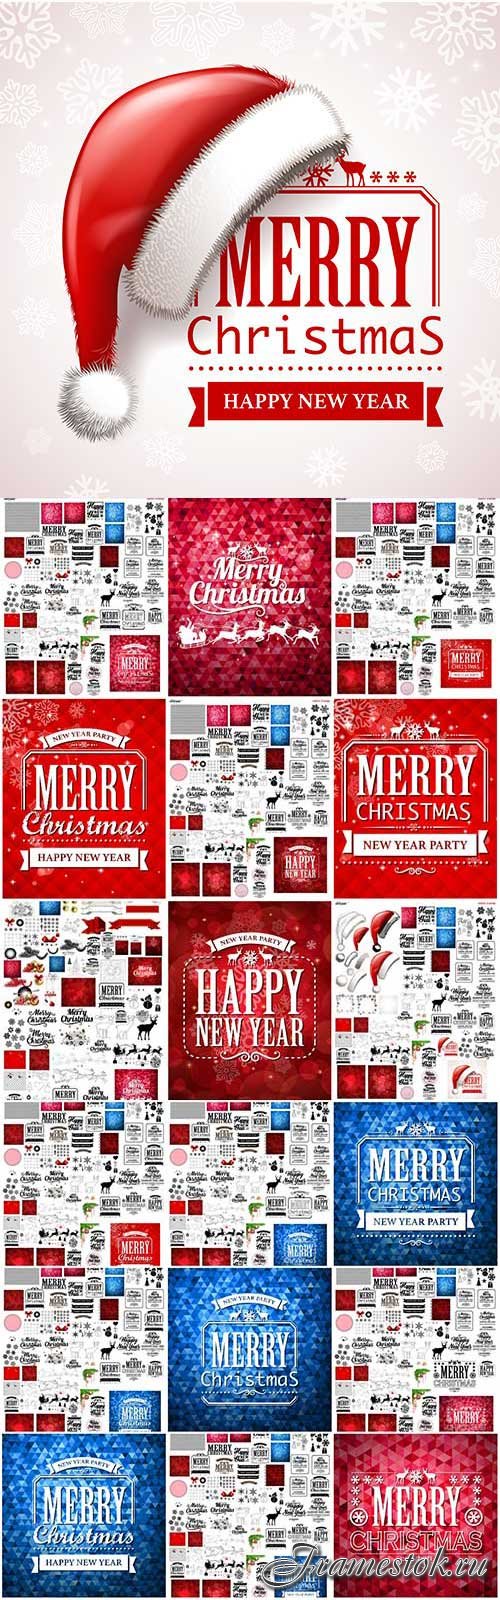 New Year and Christmas vector vol 12